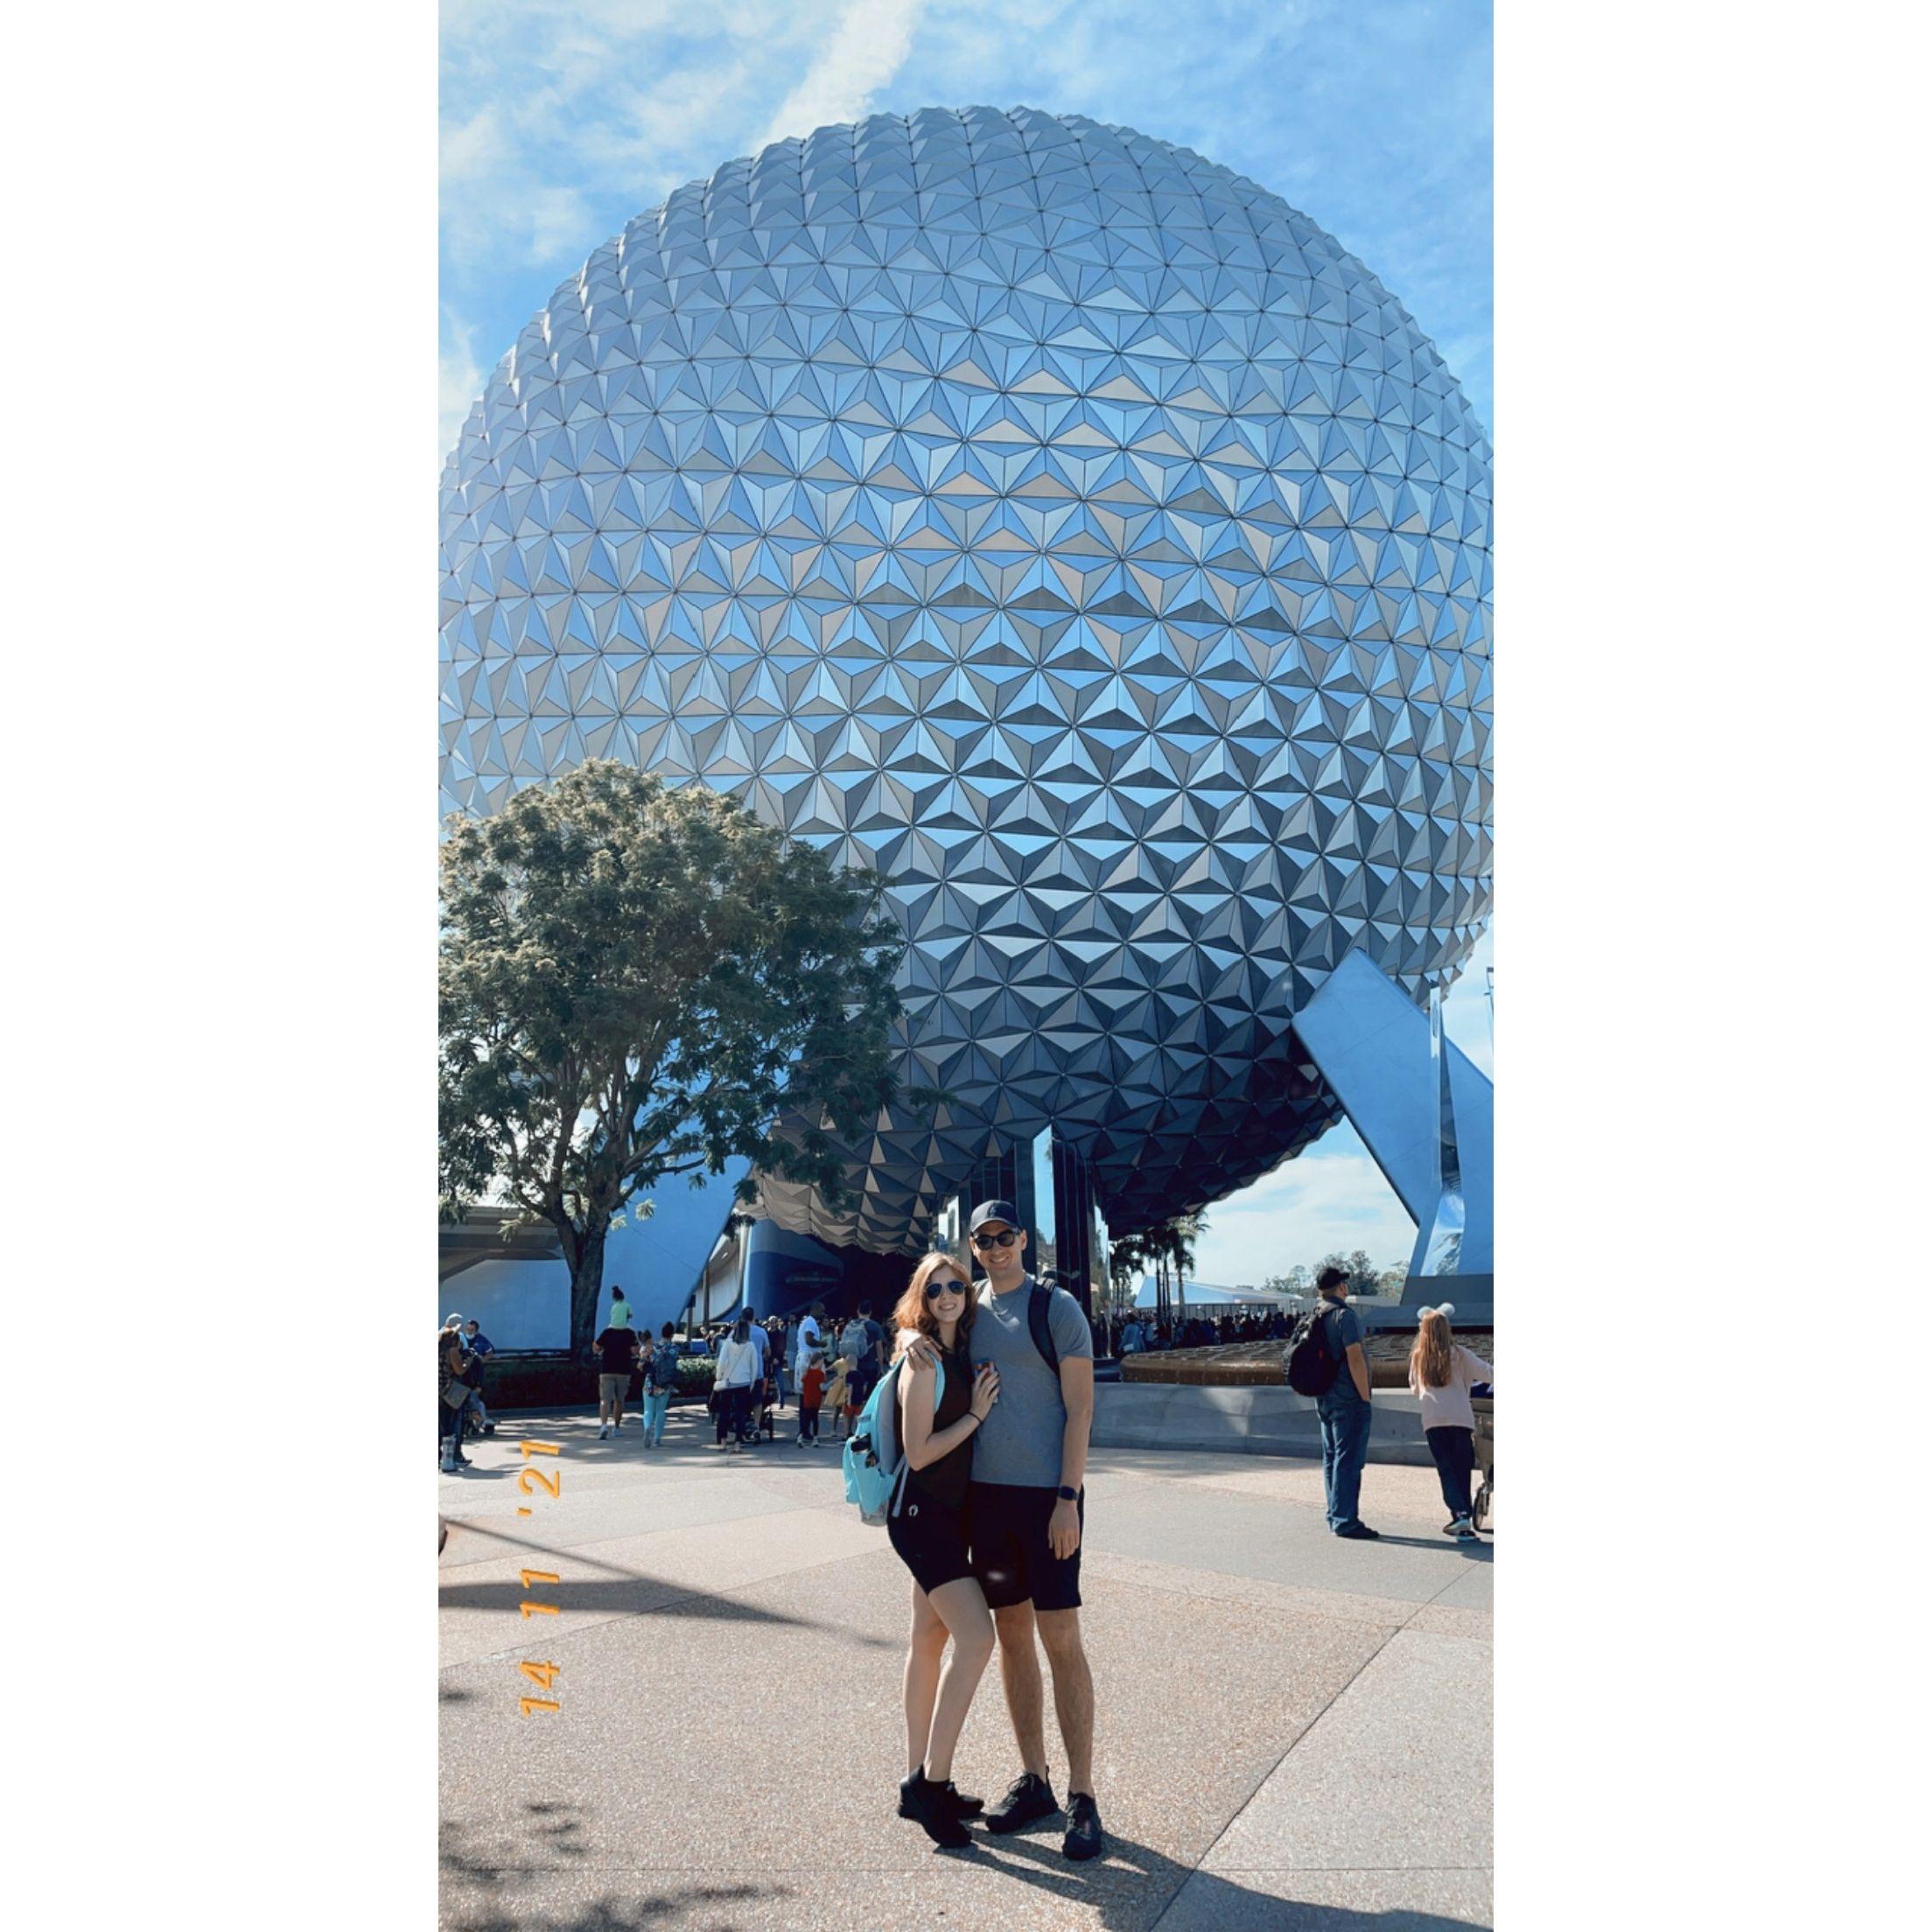 Our first ever trip together! Disney in Nov